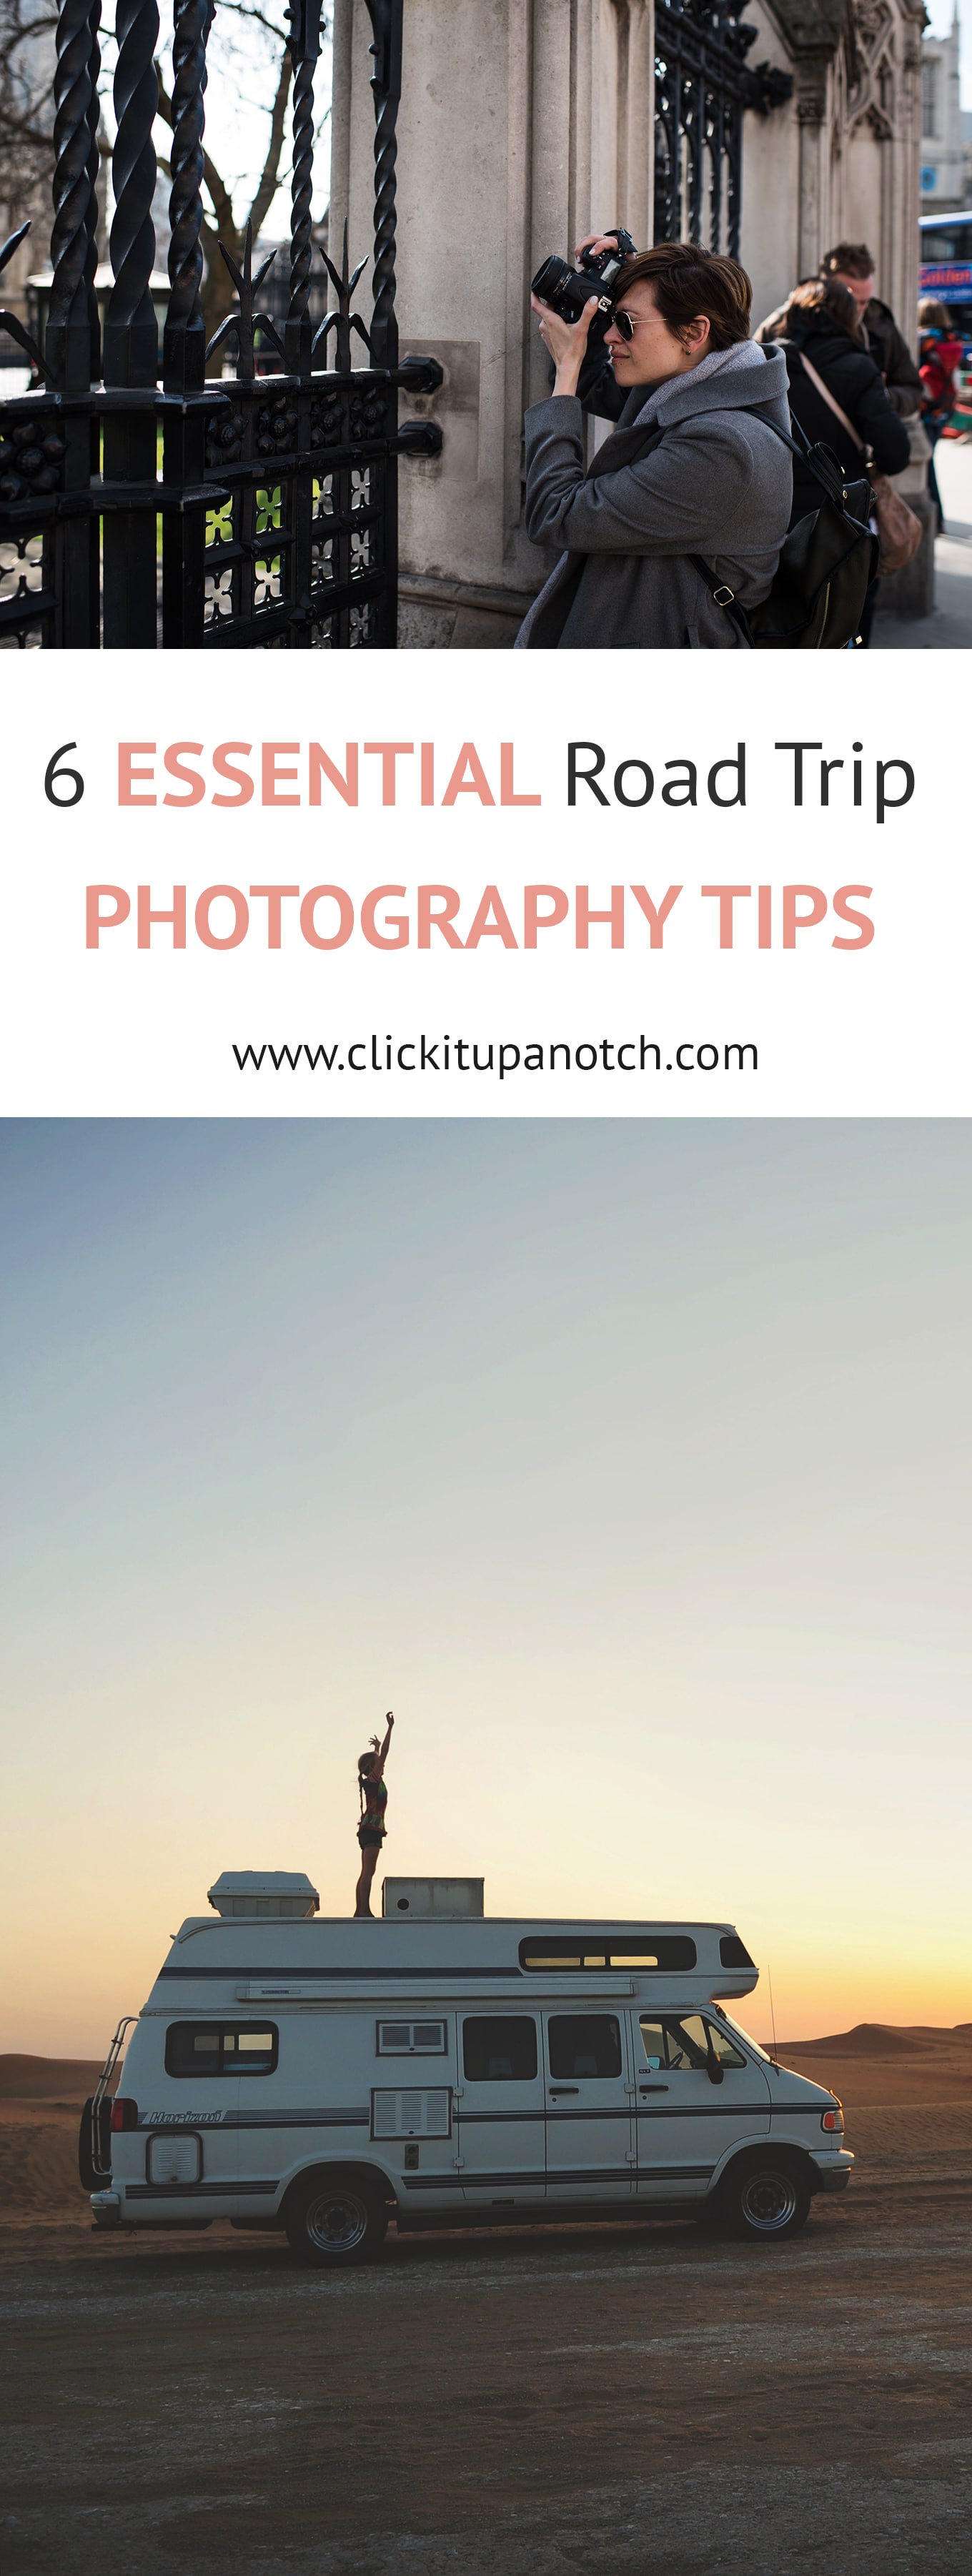 This is a great read for anyone getting ready for a long road trip or traveling on vacation. Read - "5 Essential Road Trip Photography Tips"